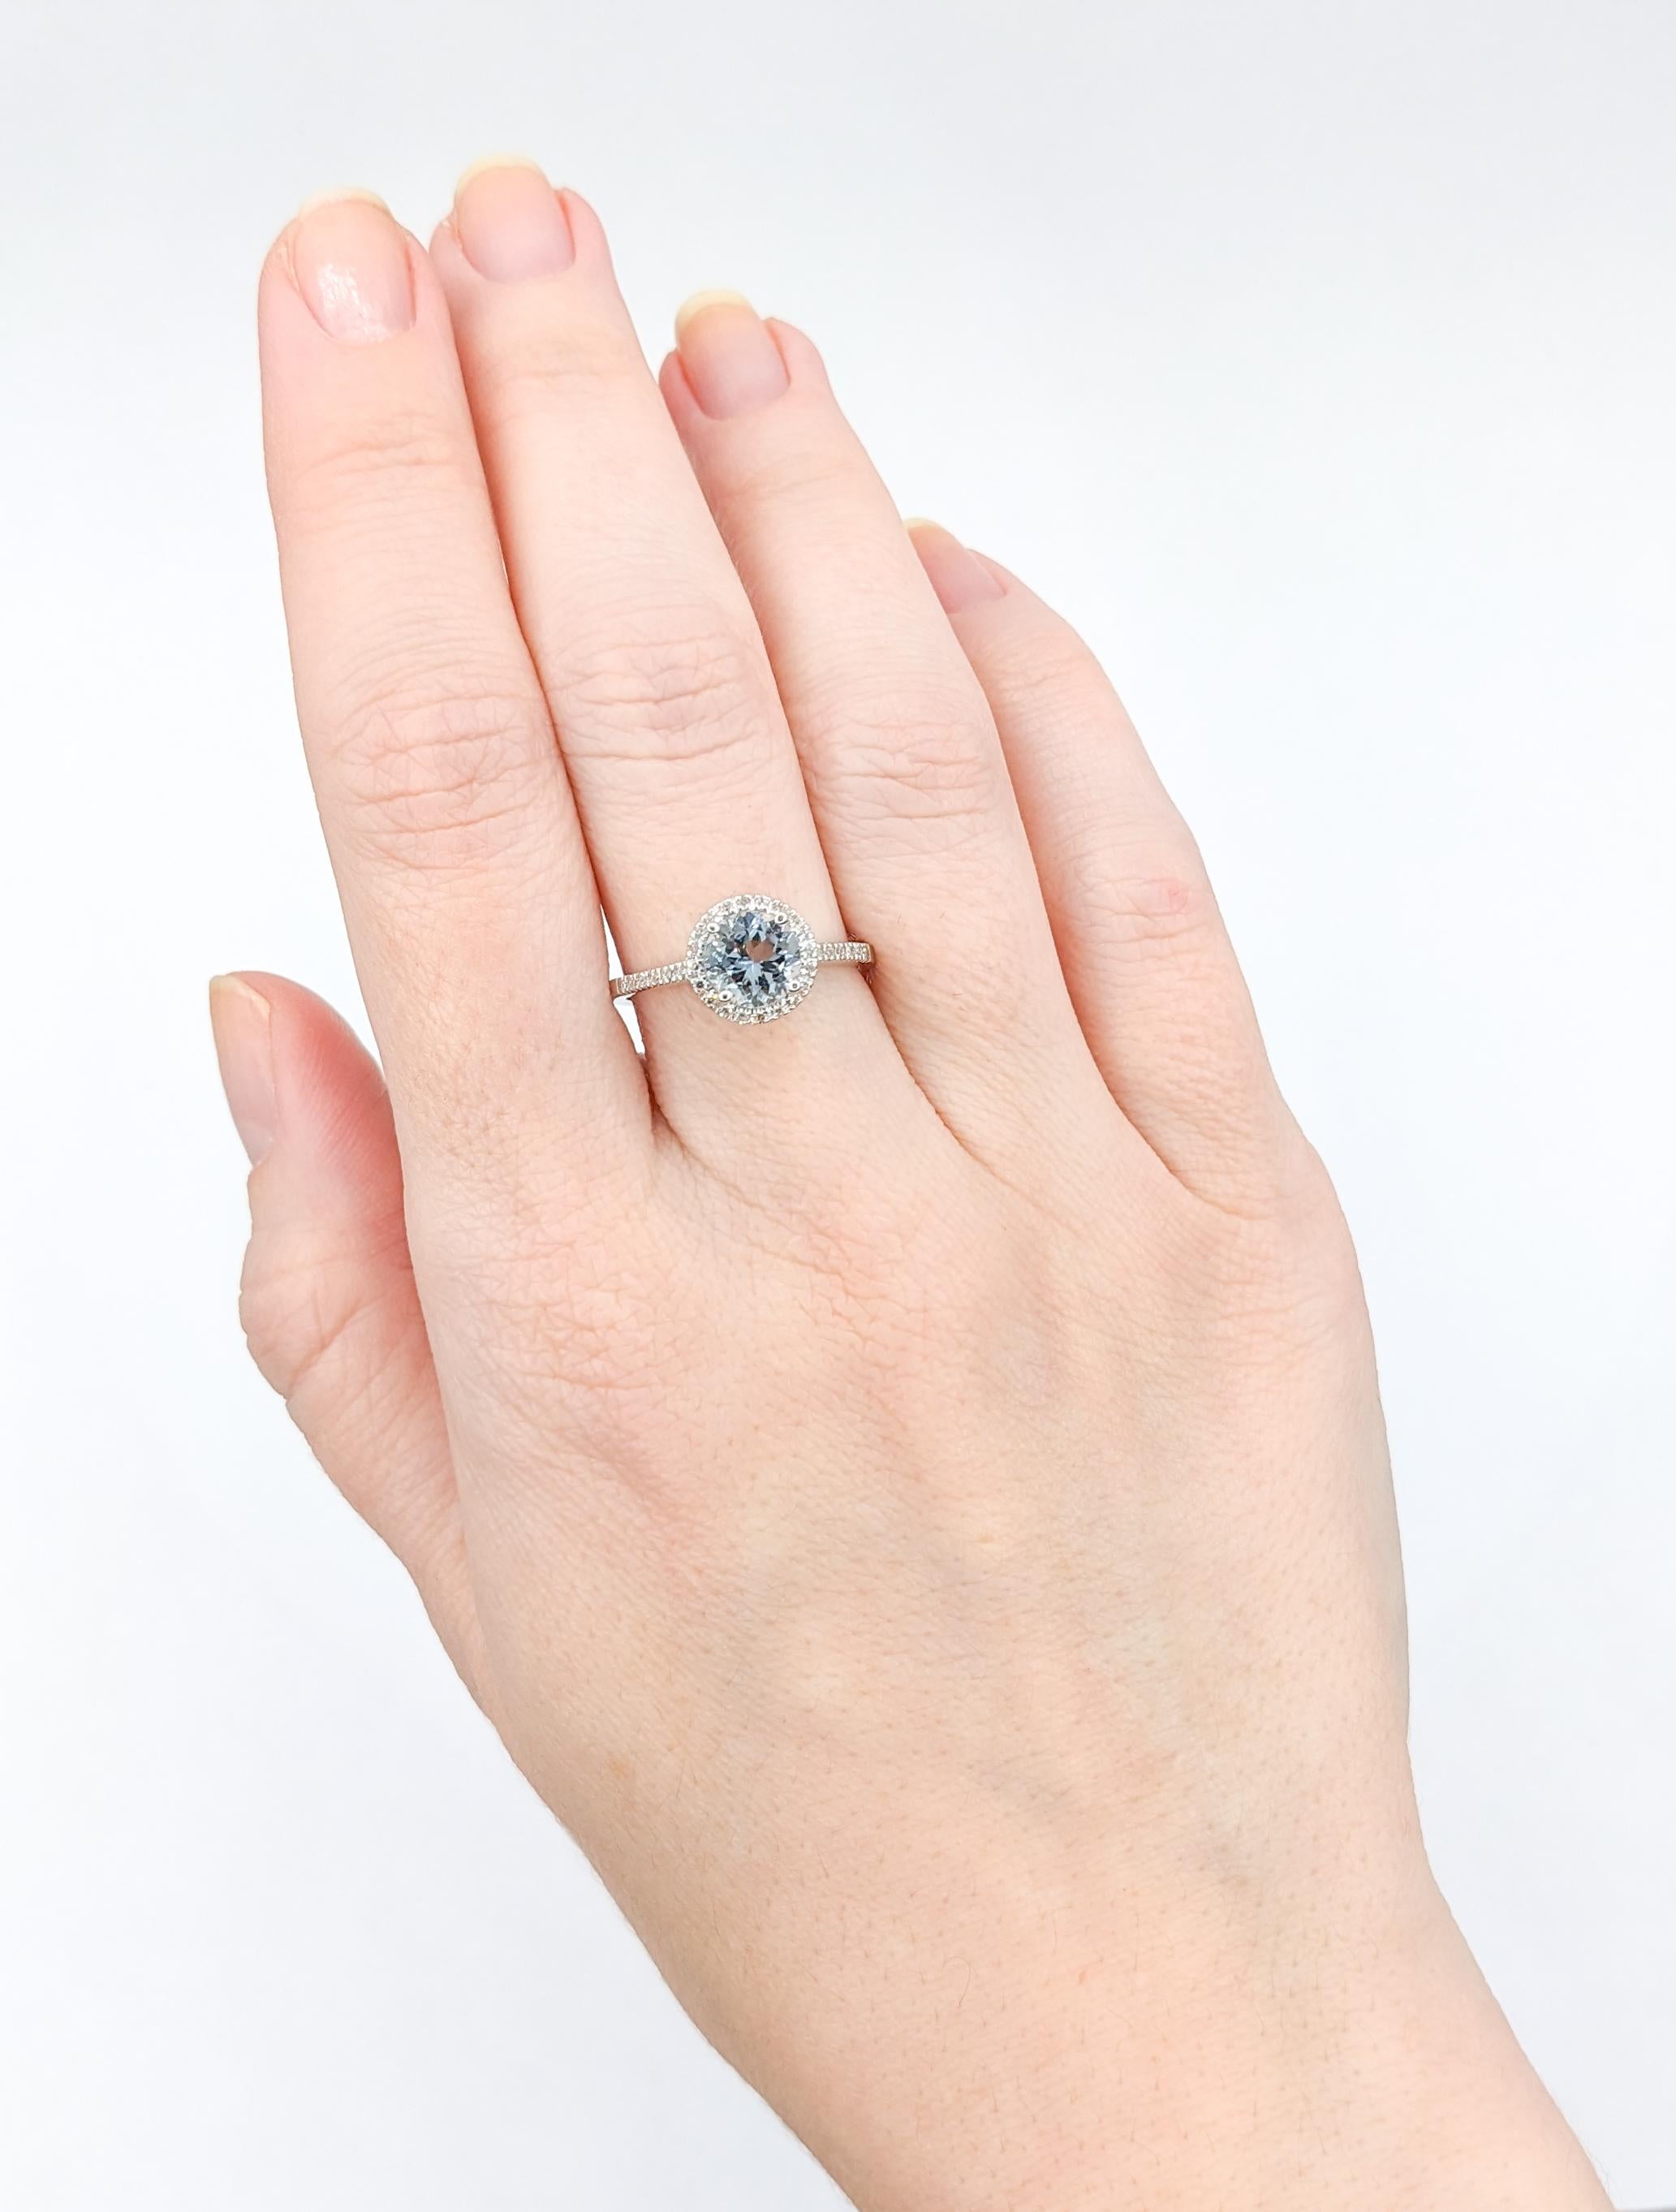 Chic Aquamarine & Diamond Halo Ring in White Gold

Discover elegance in every detail with this exquisite 14k white gold ring. Adorned with a breathtaking round 1.13 carat soft blue Aquamarine surrounded by a halo of .12ctw dazzling round diamonds.